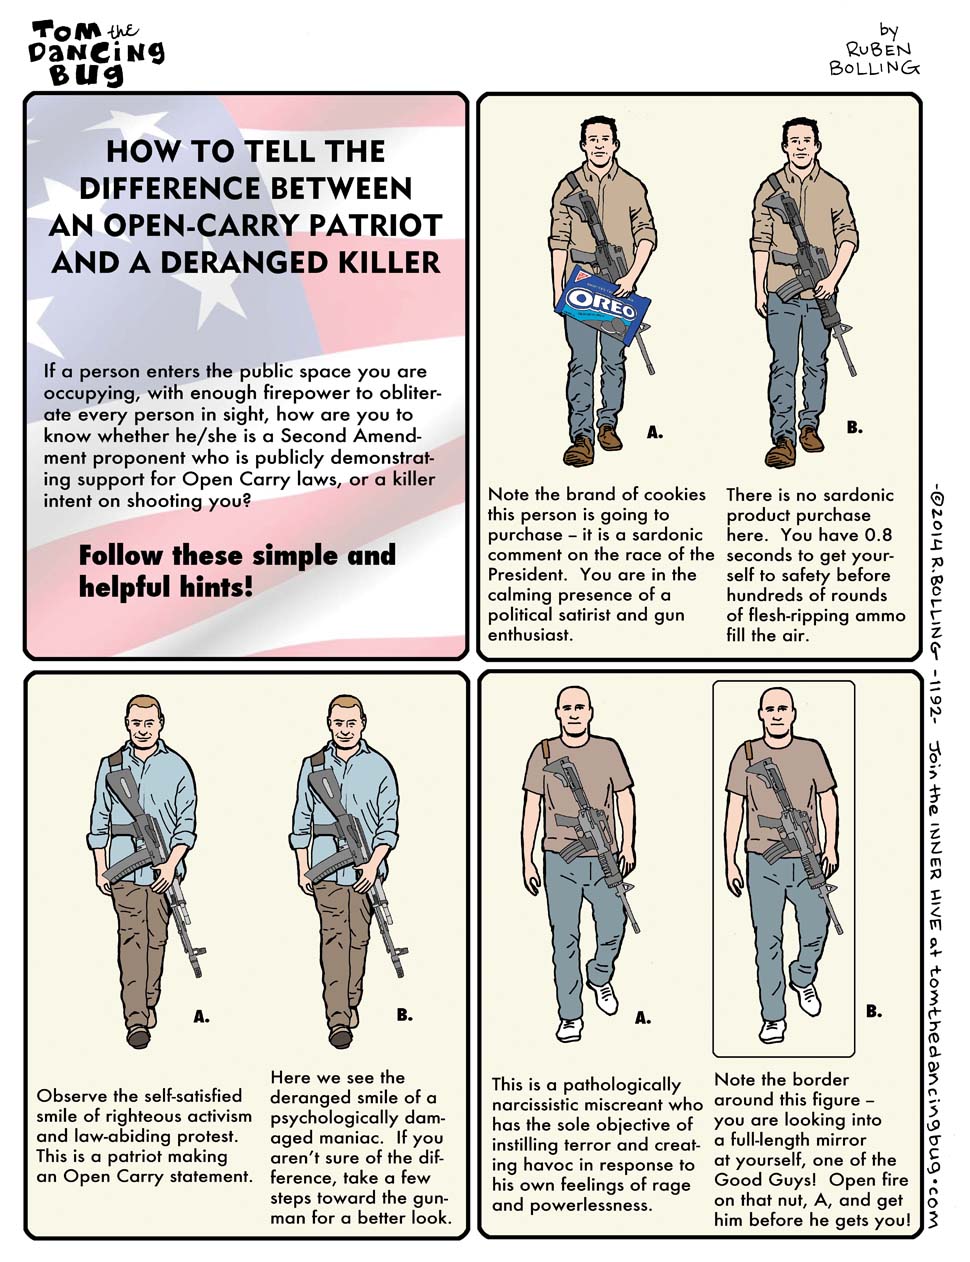 how to tell the difference between an open-carry patriot and a deranged killer, follow these simple and helpful hints, infographic